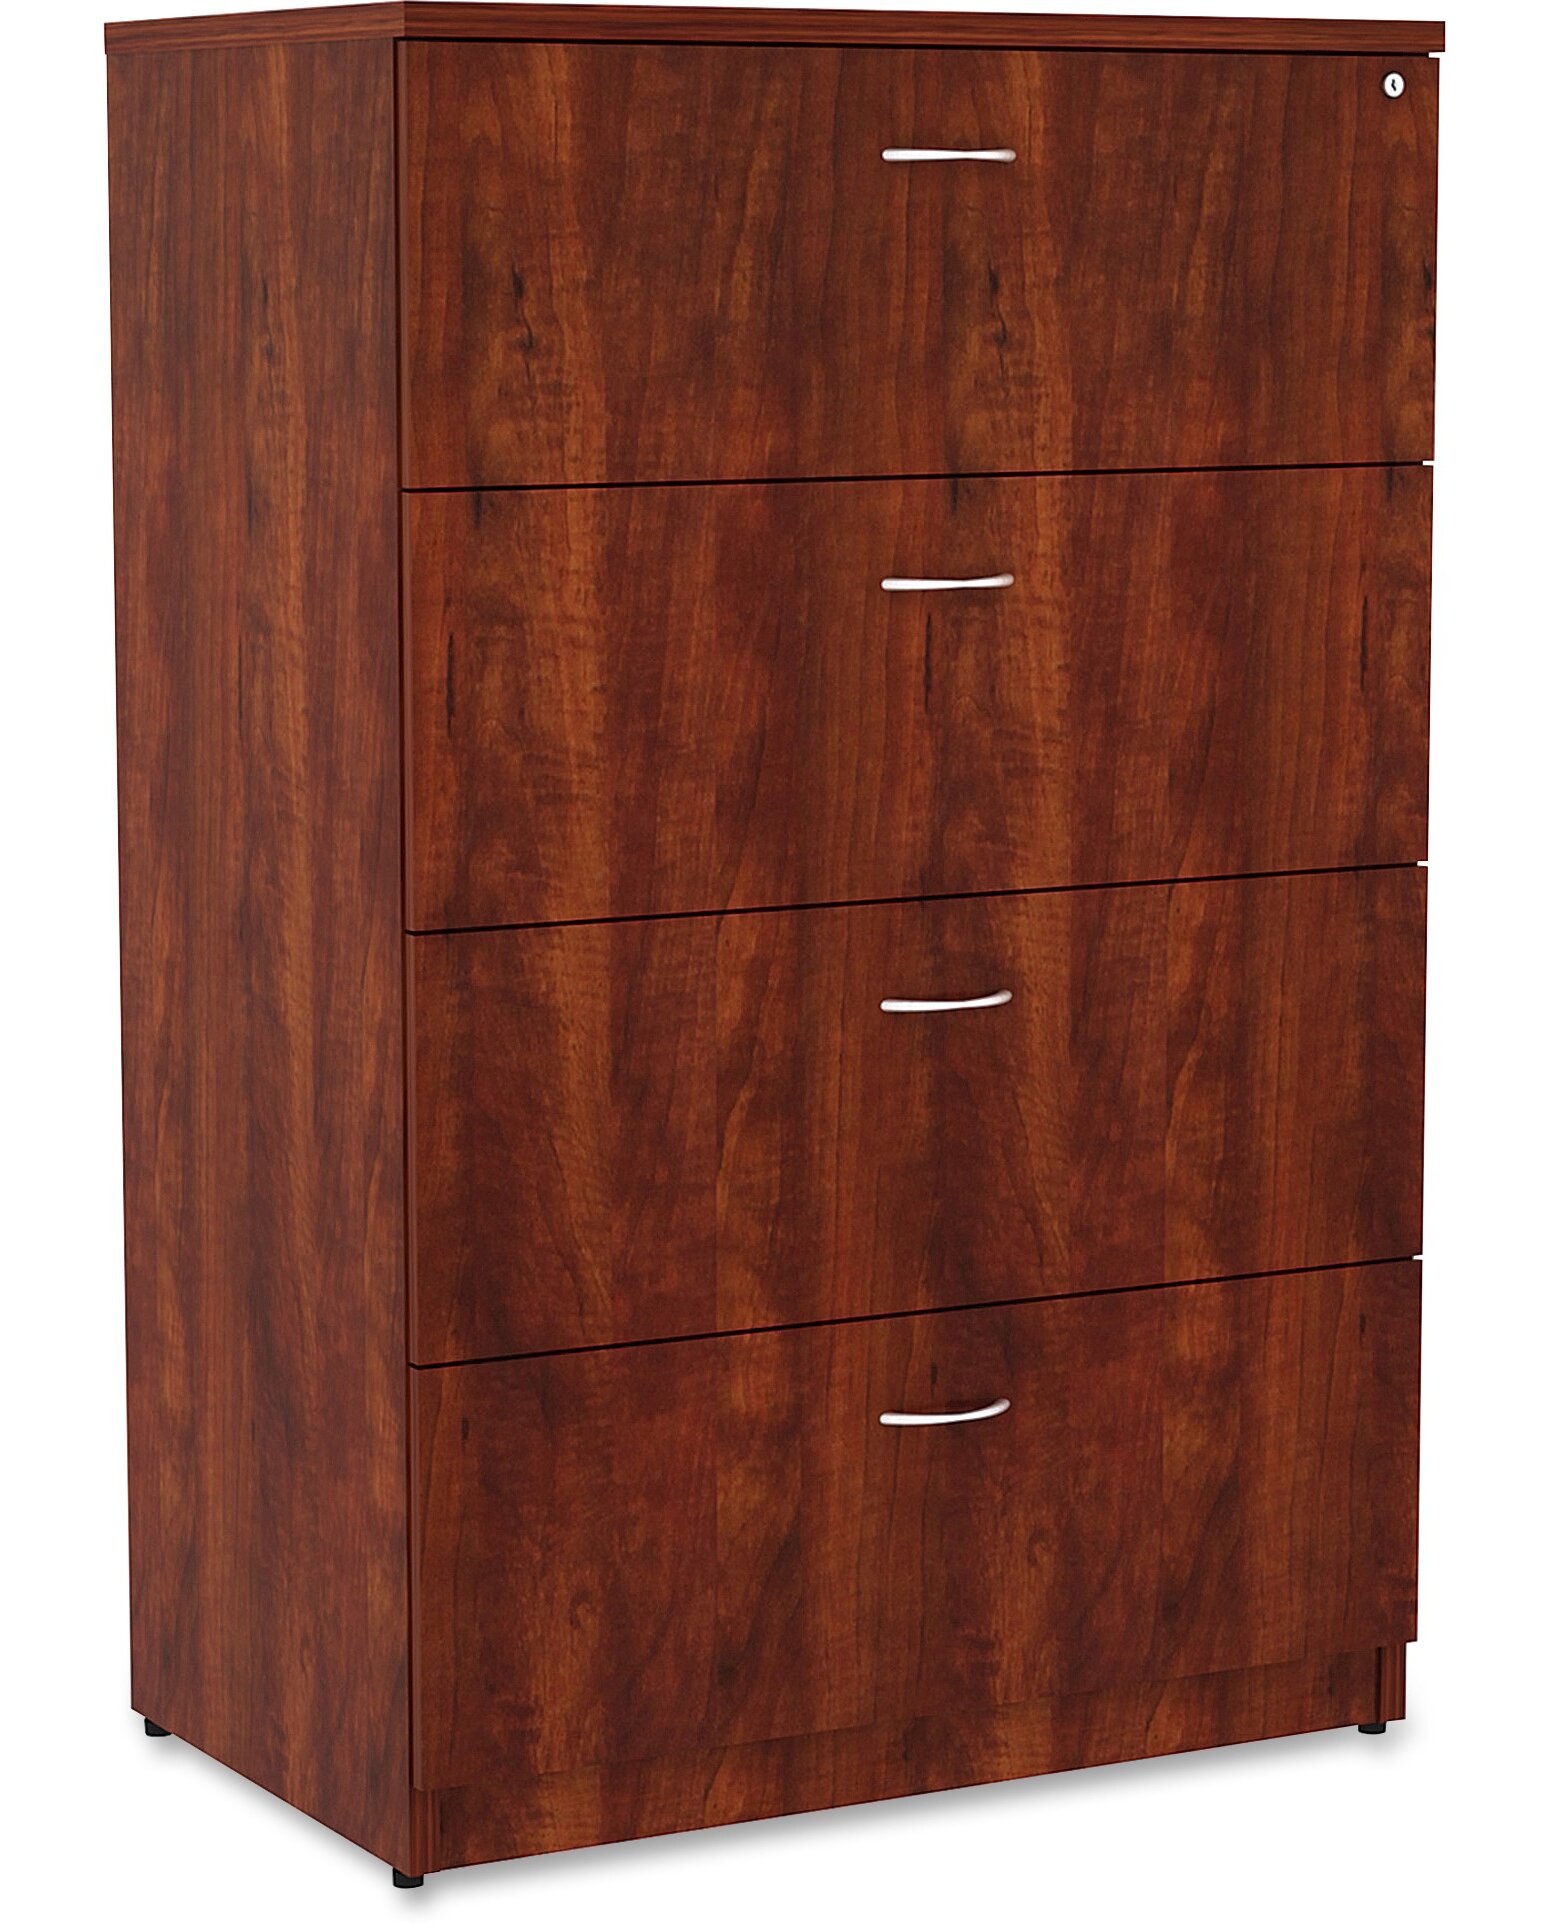 Lorell Essentials 4 Drawer Lateral Filing Cabinet Wayfair